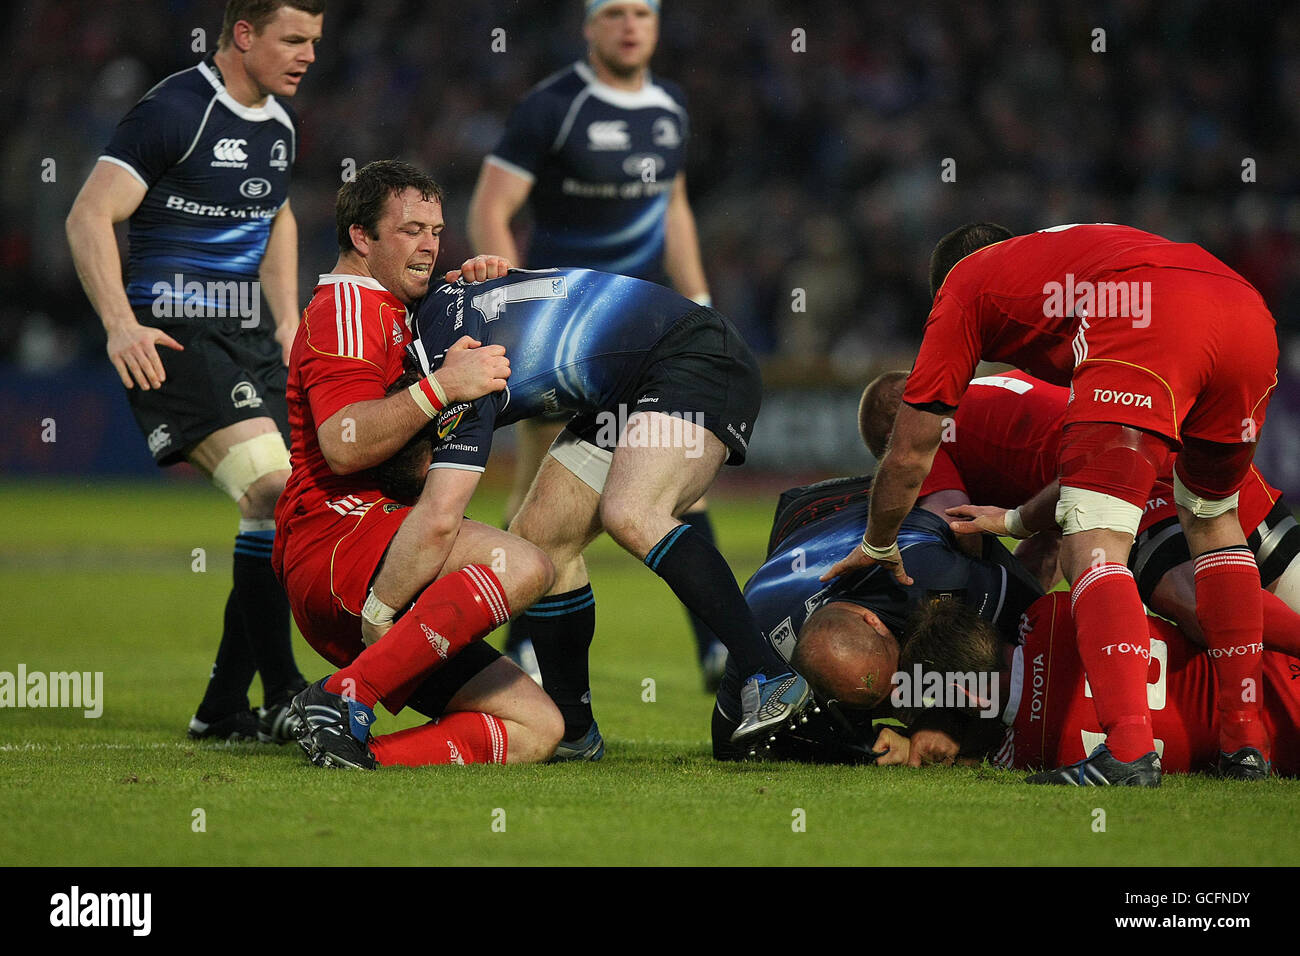 Rugby Union - Magners League Semi Final - Munster v Leinster - RDS Stock Photo